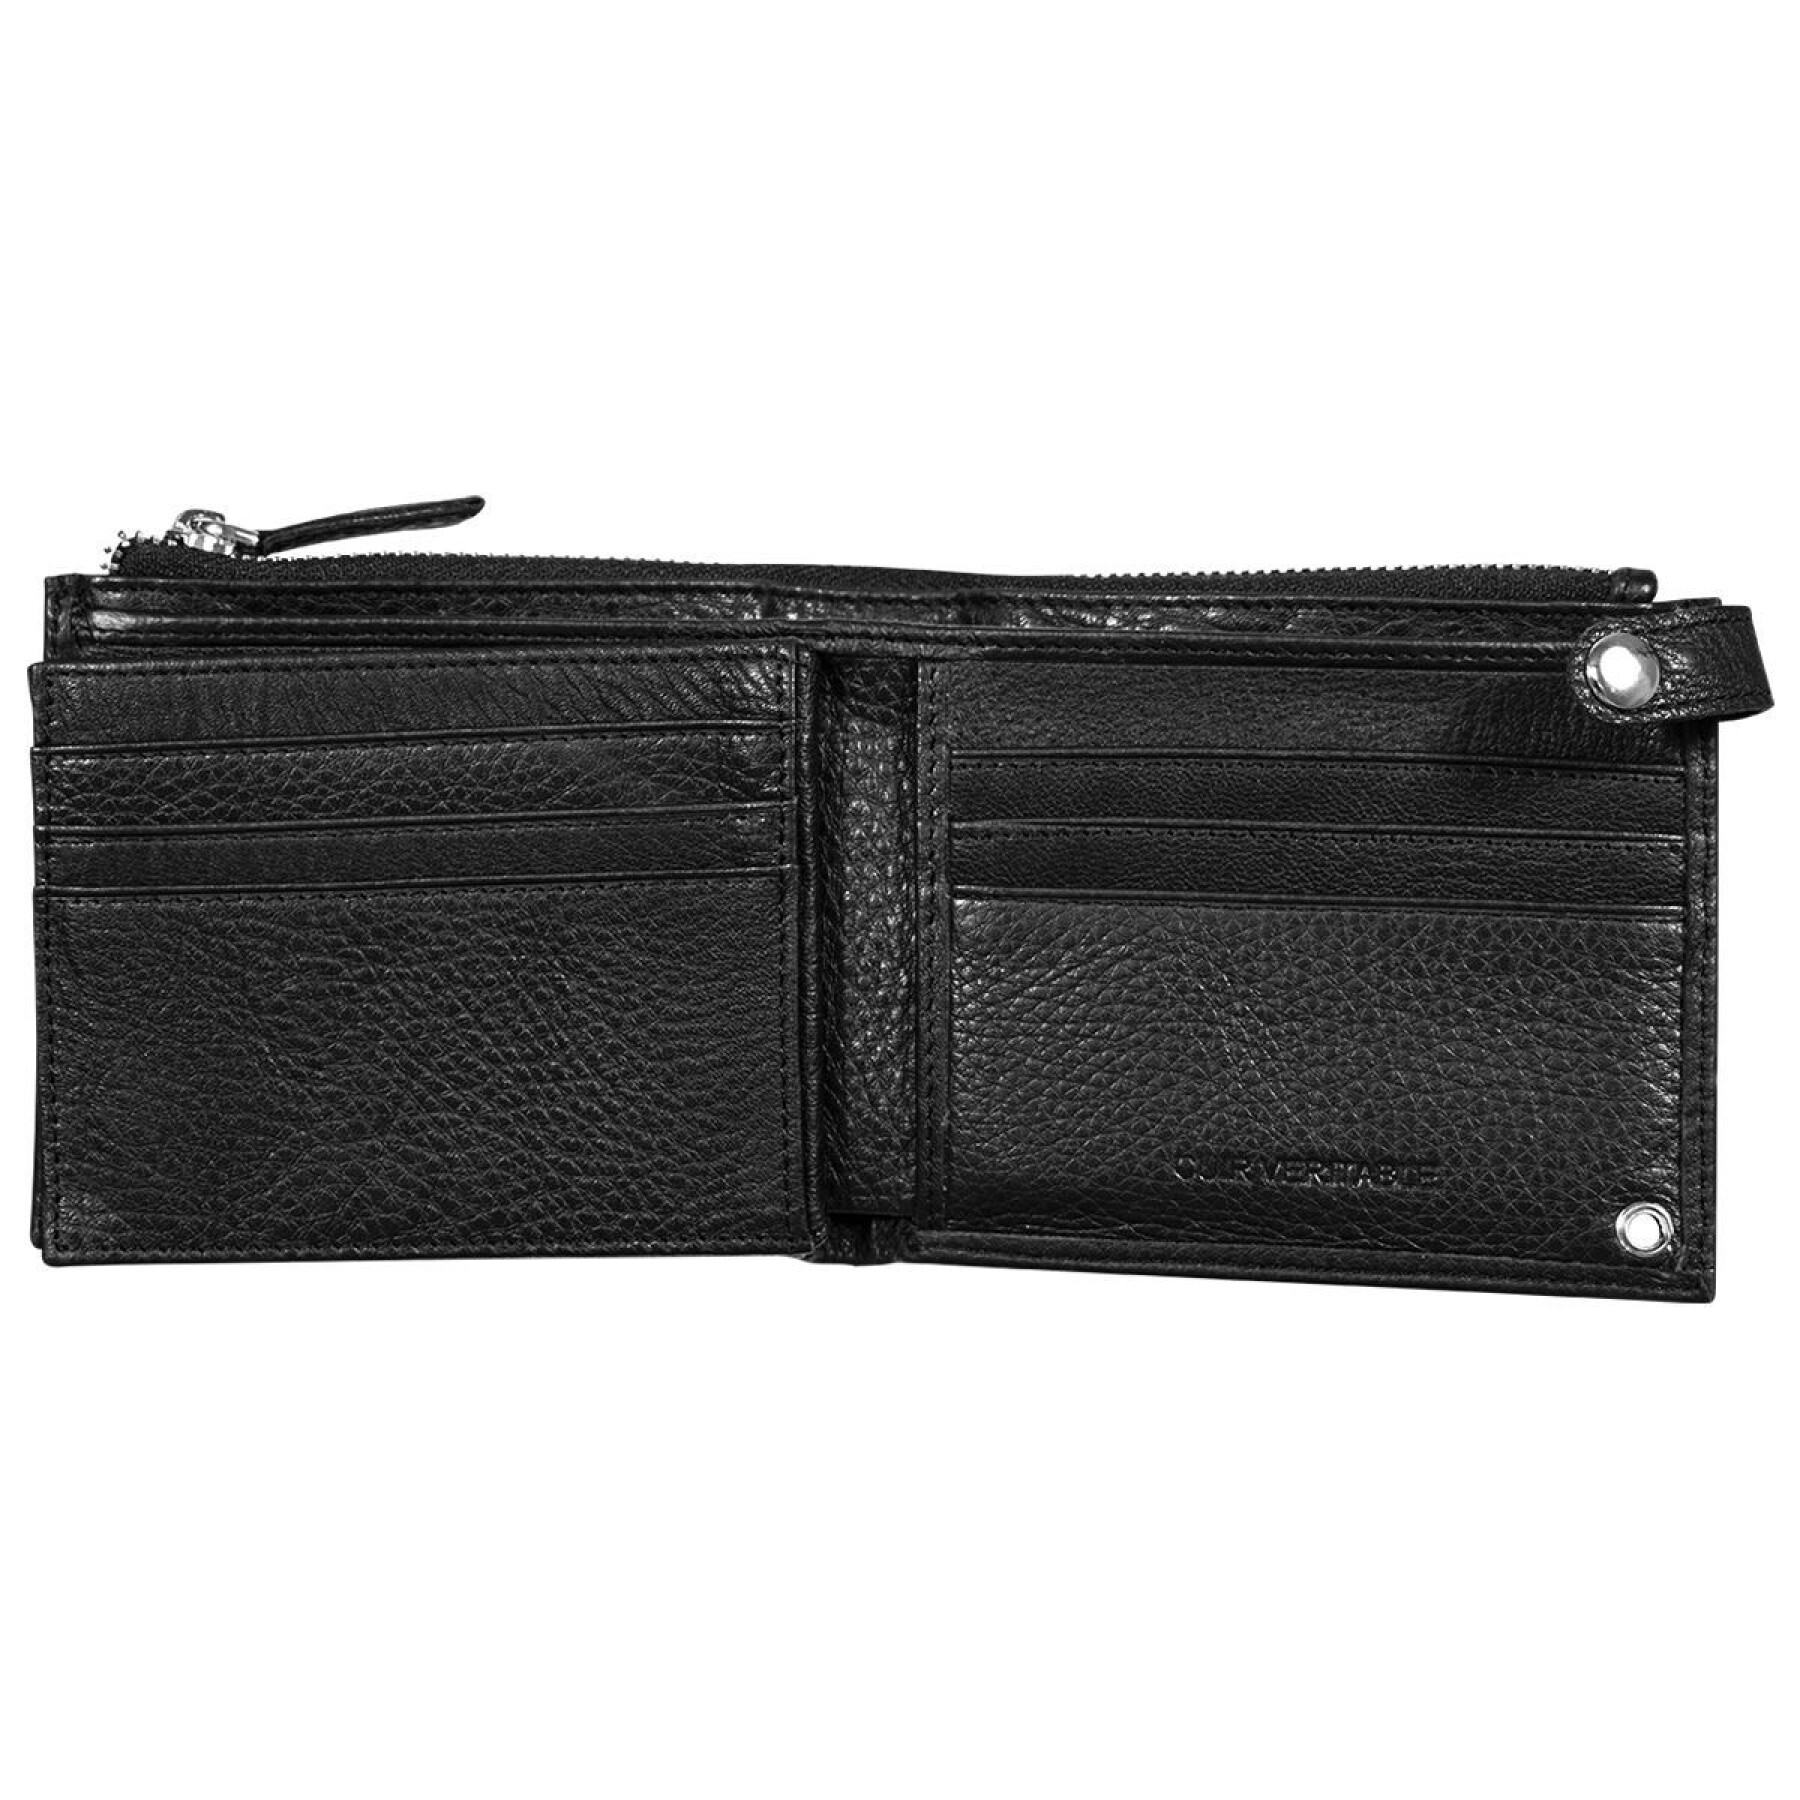 Zipped leather chain wallet Rock à Gogo